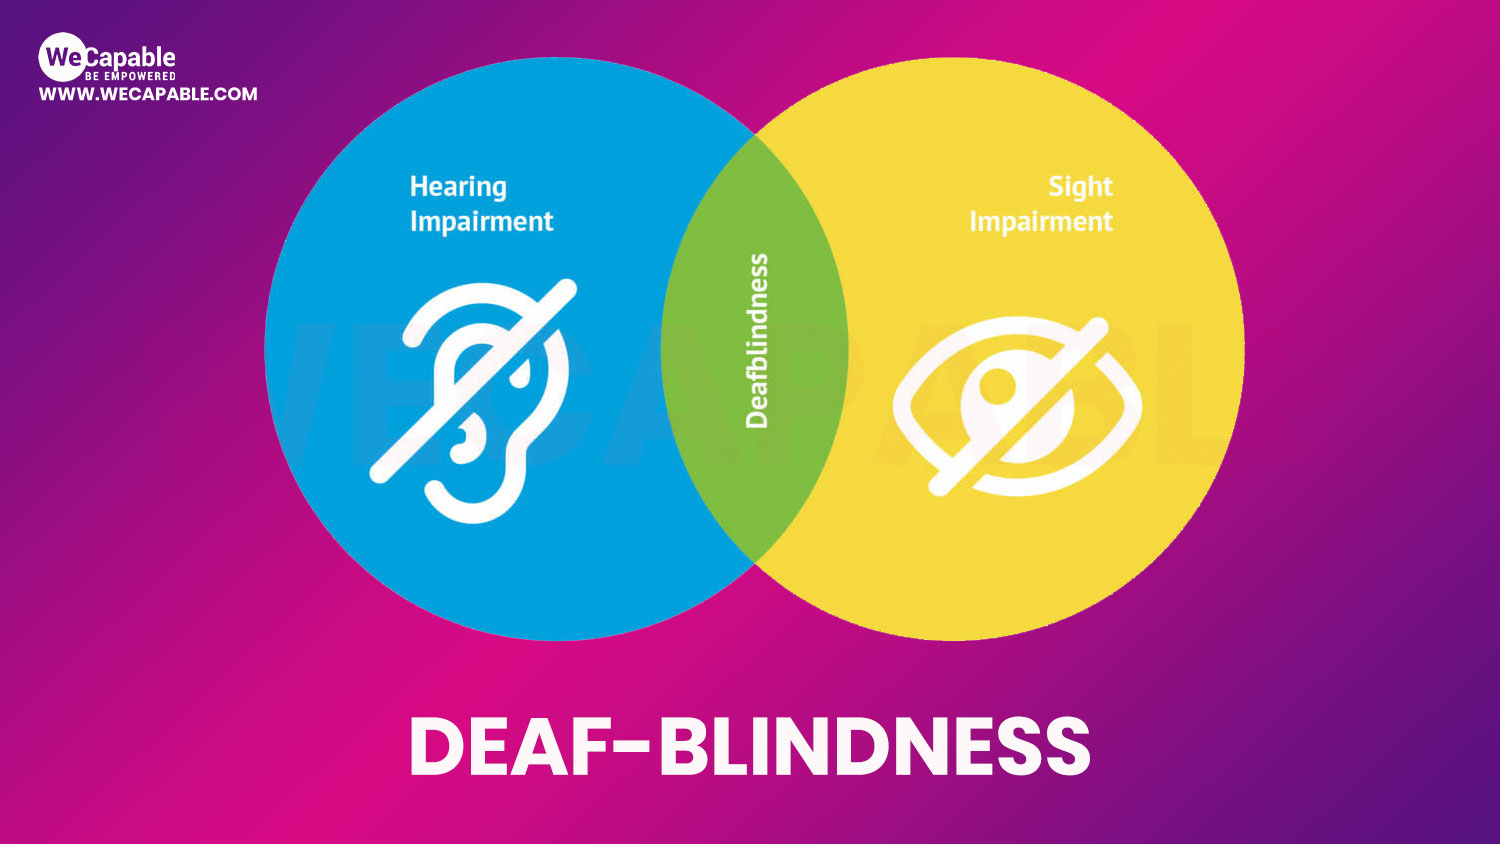 image showing a Venn diagram depicting deaf blindness is at the intersection of visual and hearing impairment.